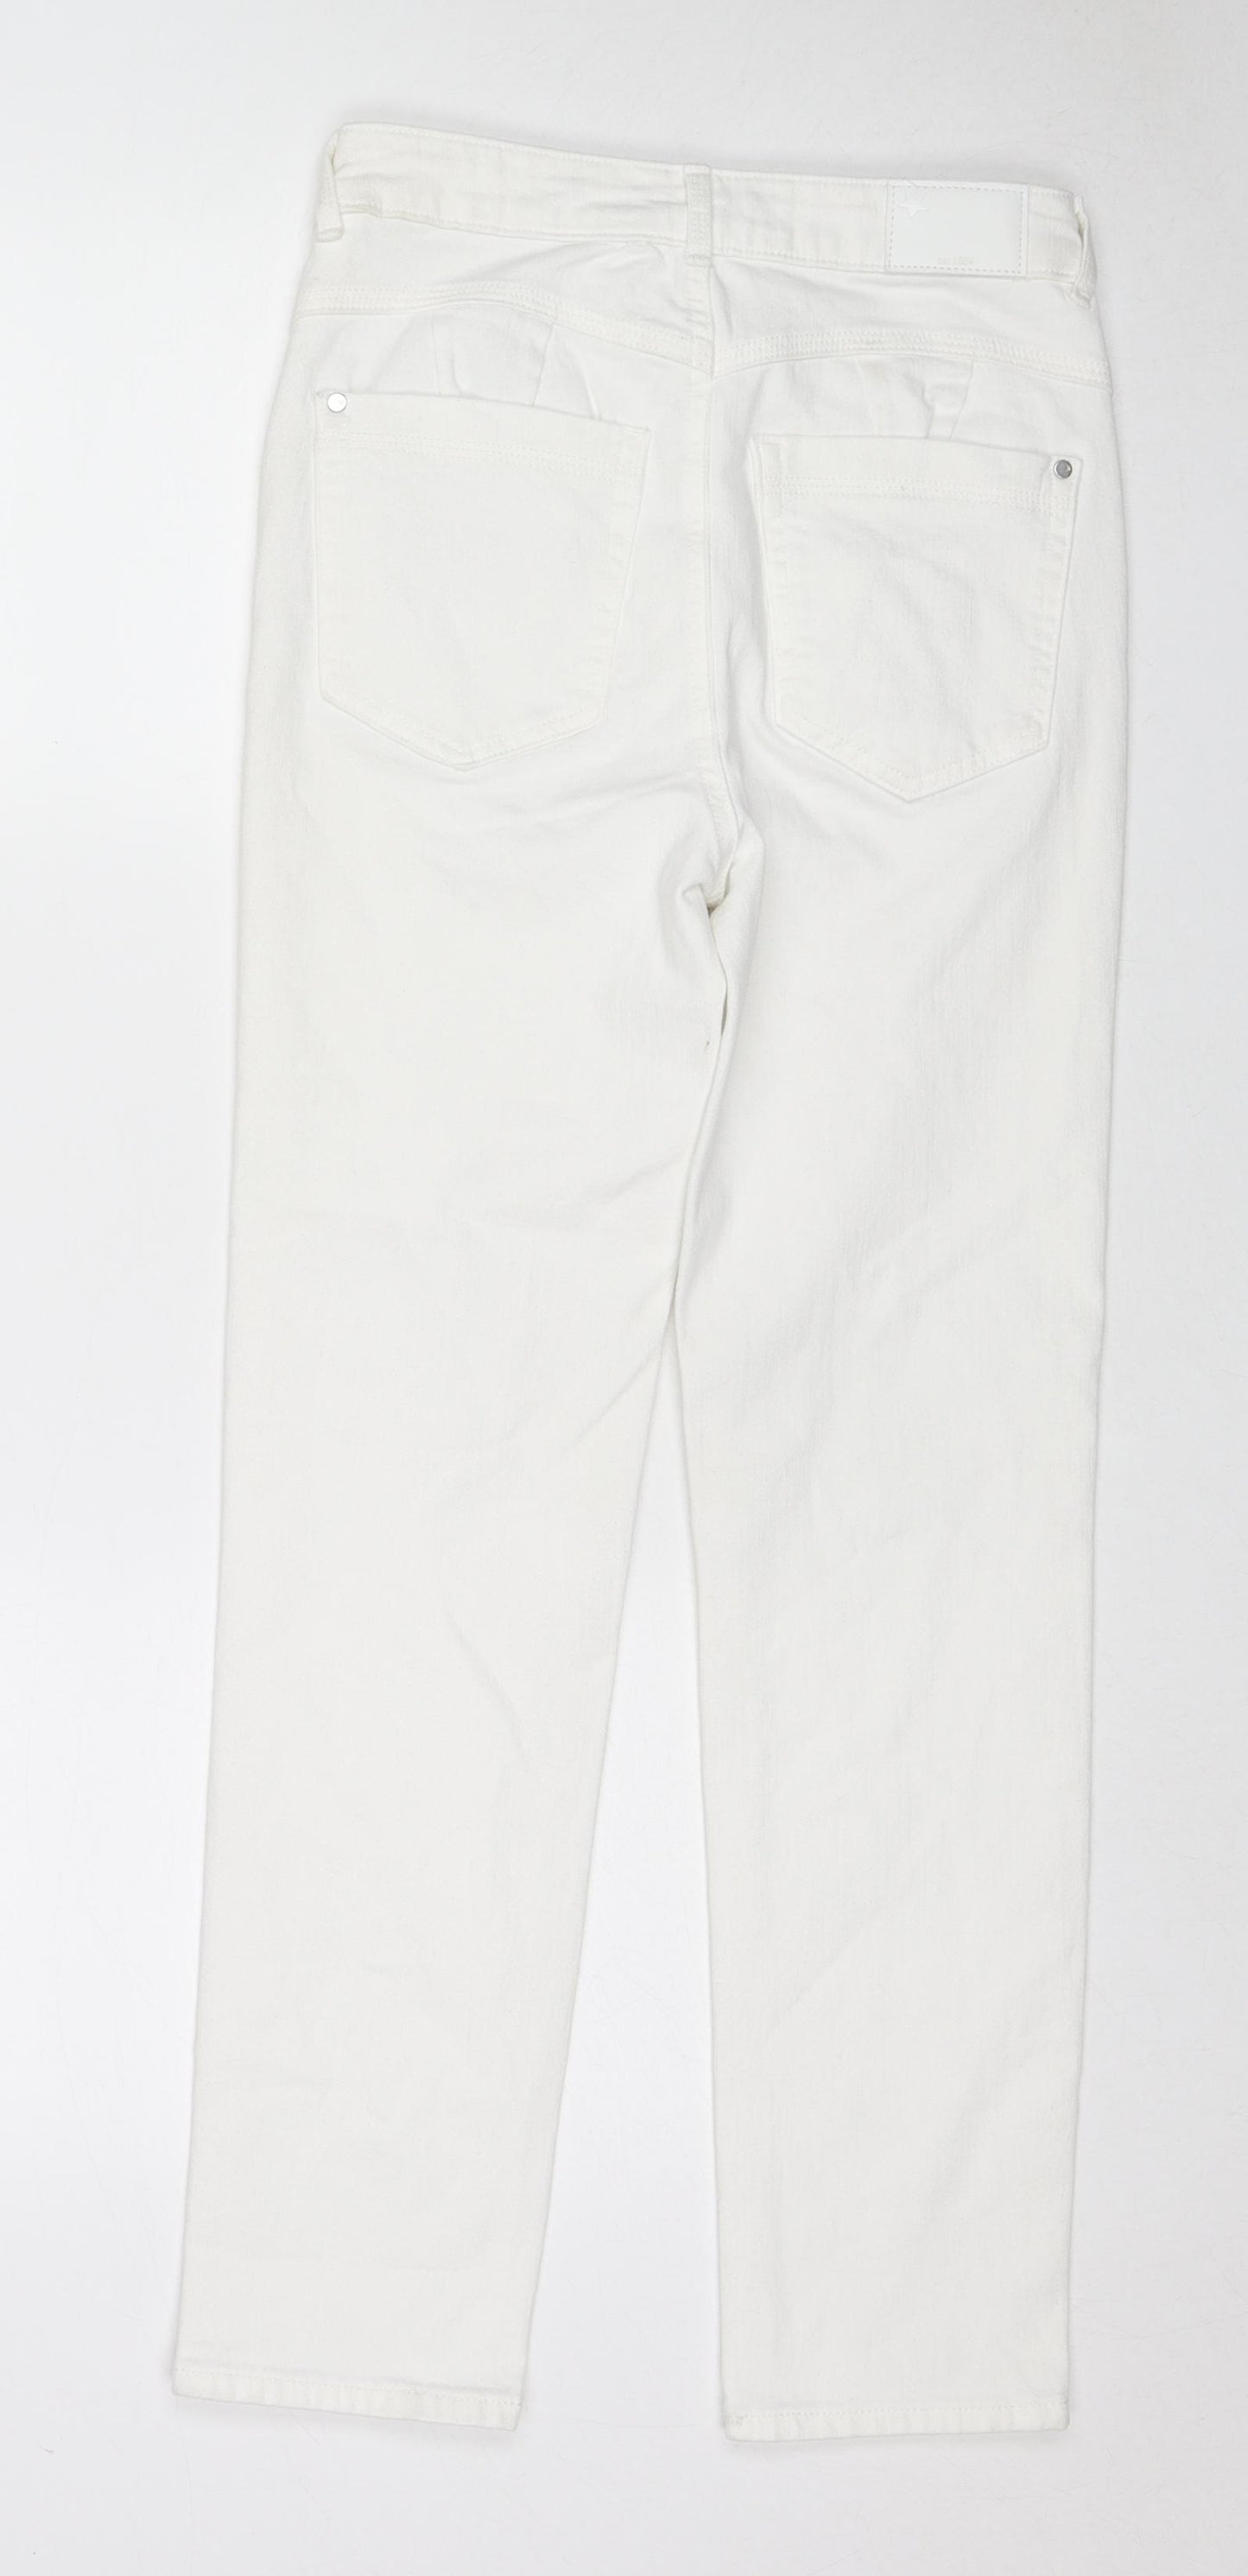 Marks and Spencer Womens White Cotton Skinny Jeans Size 8 L27 in Slim Zip